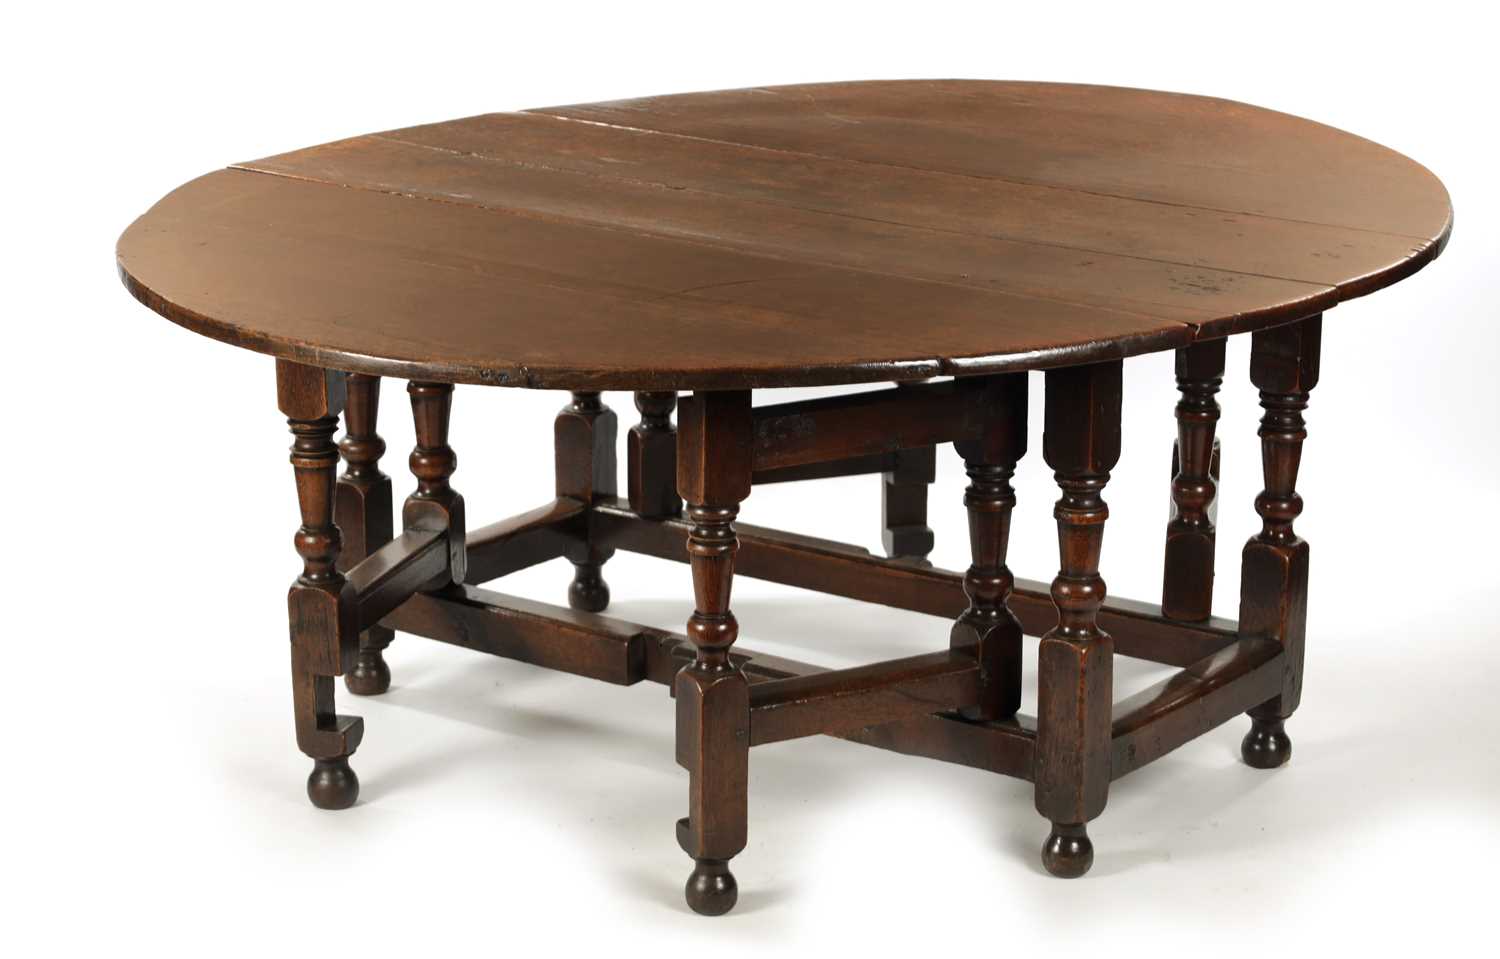 A LARGE 17TH CENTURY JOINED OAK EIGHT SEATER GATE LEG TABLE - Image 2 of 4